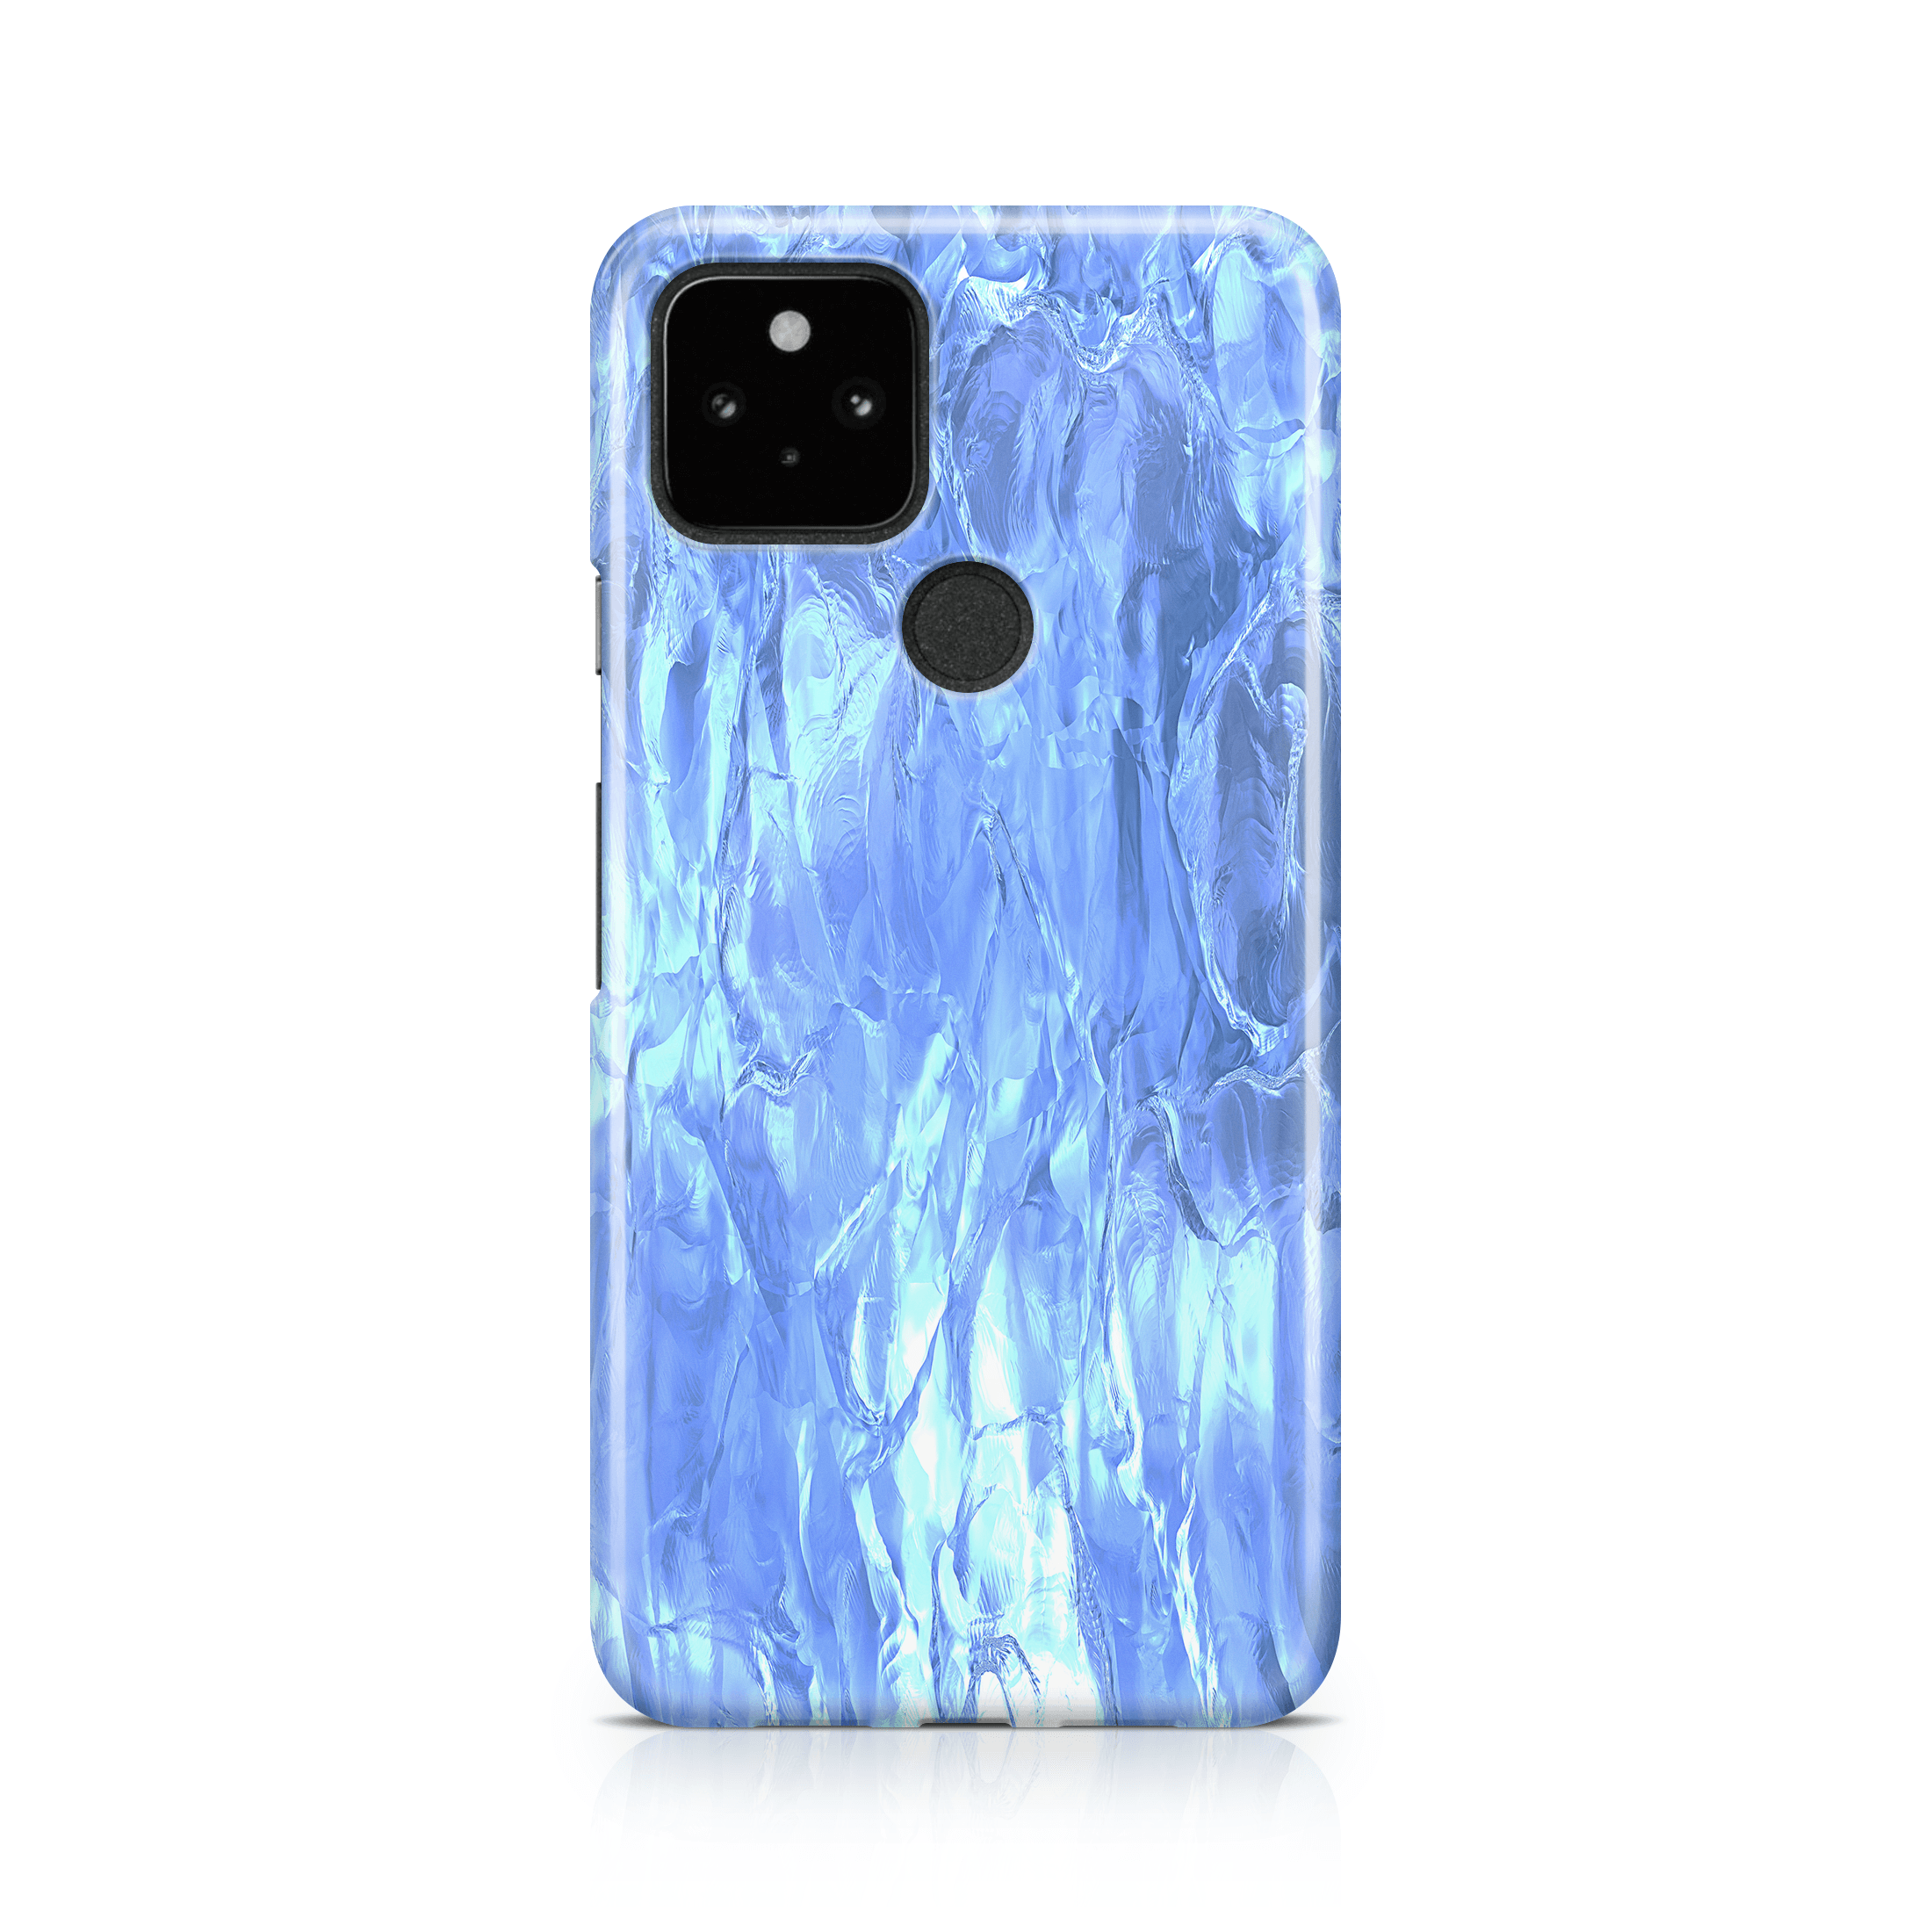 Blue Ice - Google phone case designs by CaseSwagger